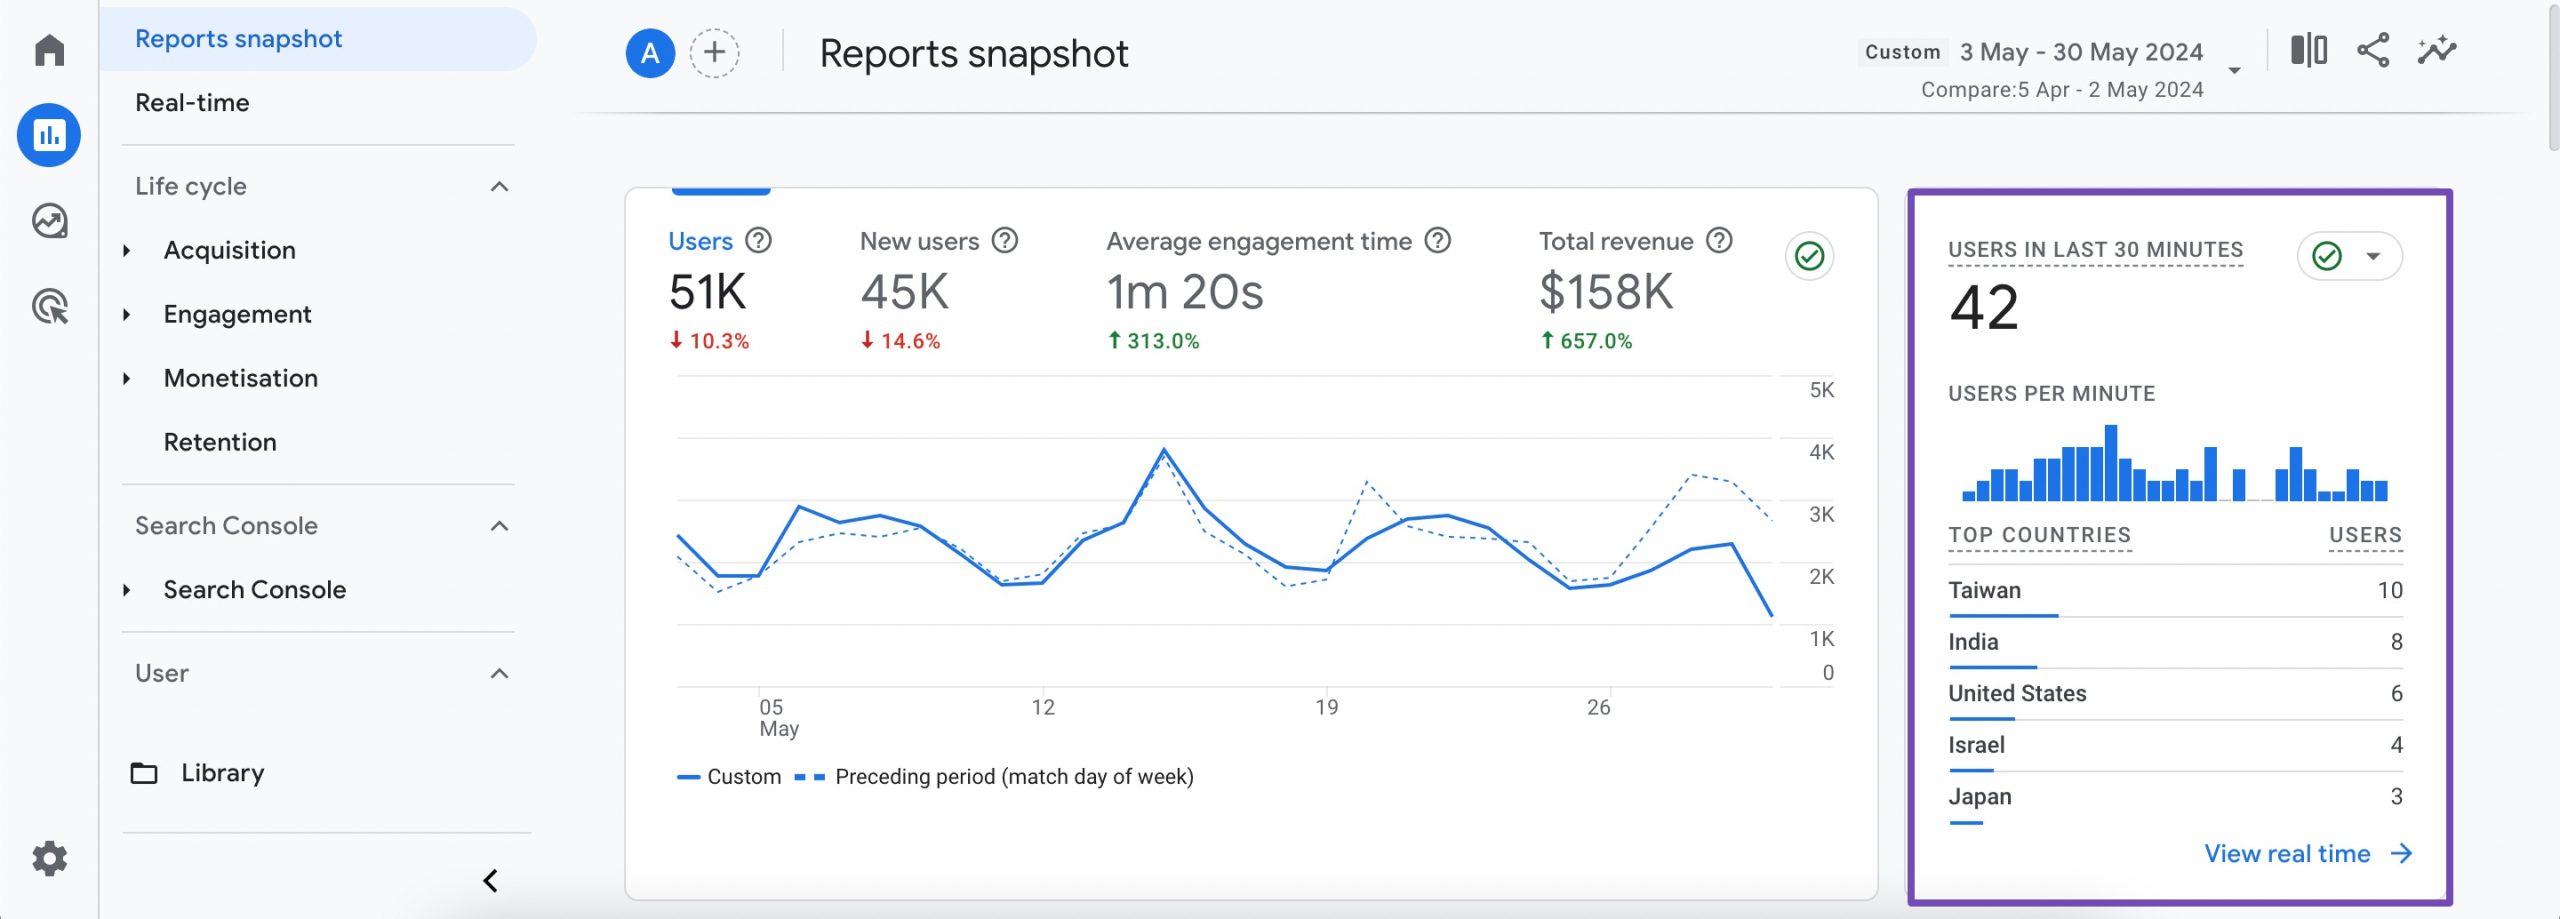 Real time data in Reports snapshot section